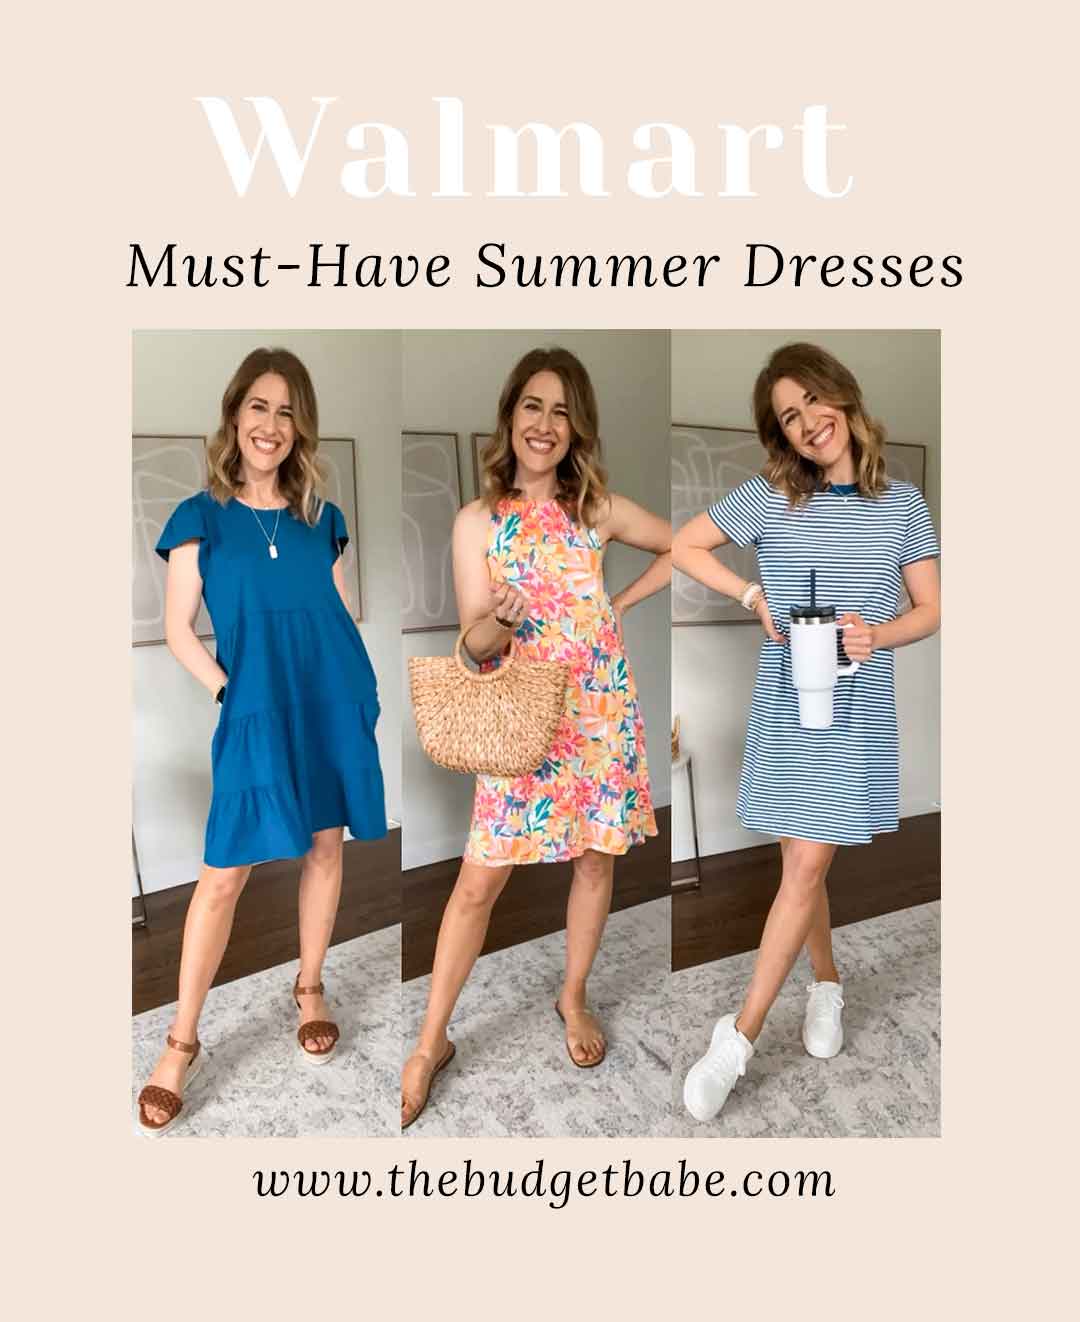 Walmart must-have summer dresses for everyday